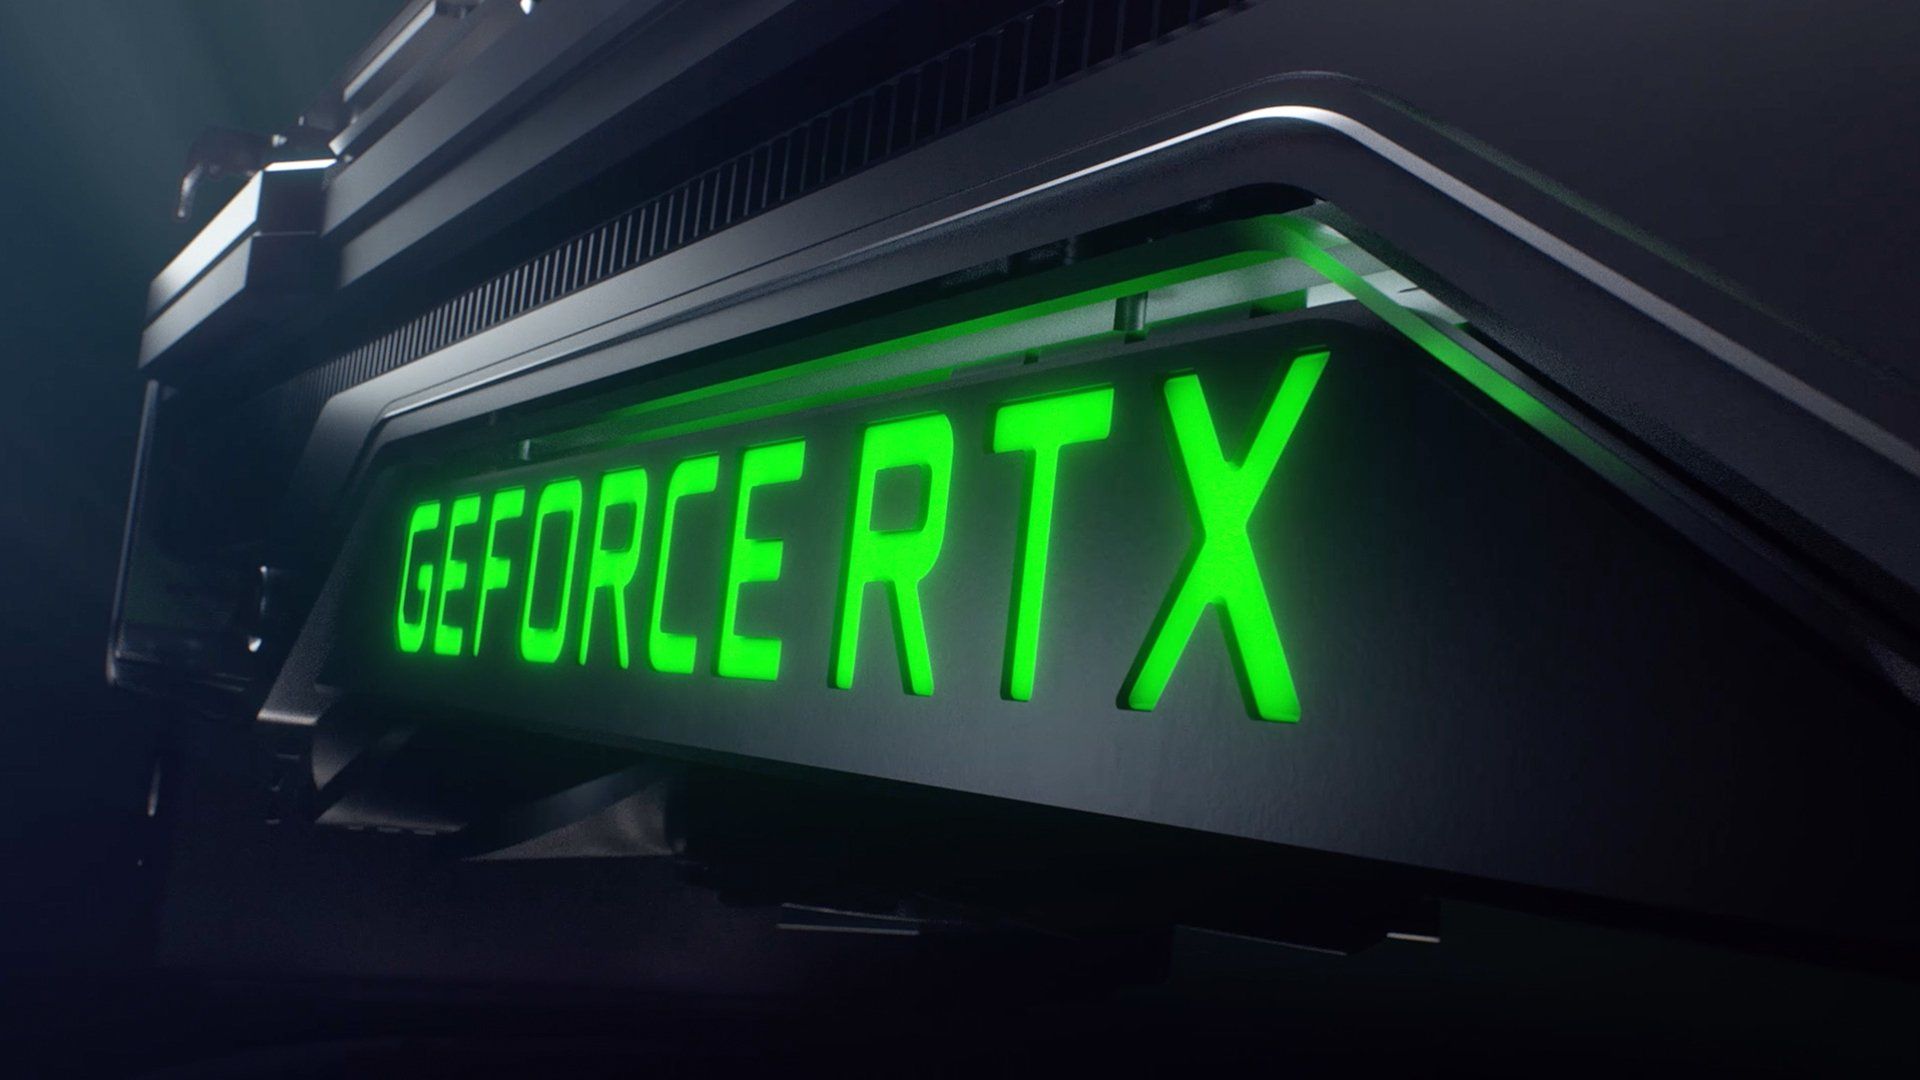 NVIDIA 3070 Ti Positioned Between RTX 3070 and RTX 3080 To Compete With AMD Radeon RX 6000 Series Graphics Cards?